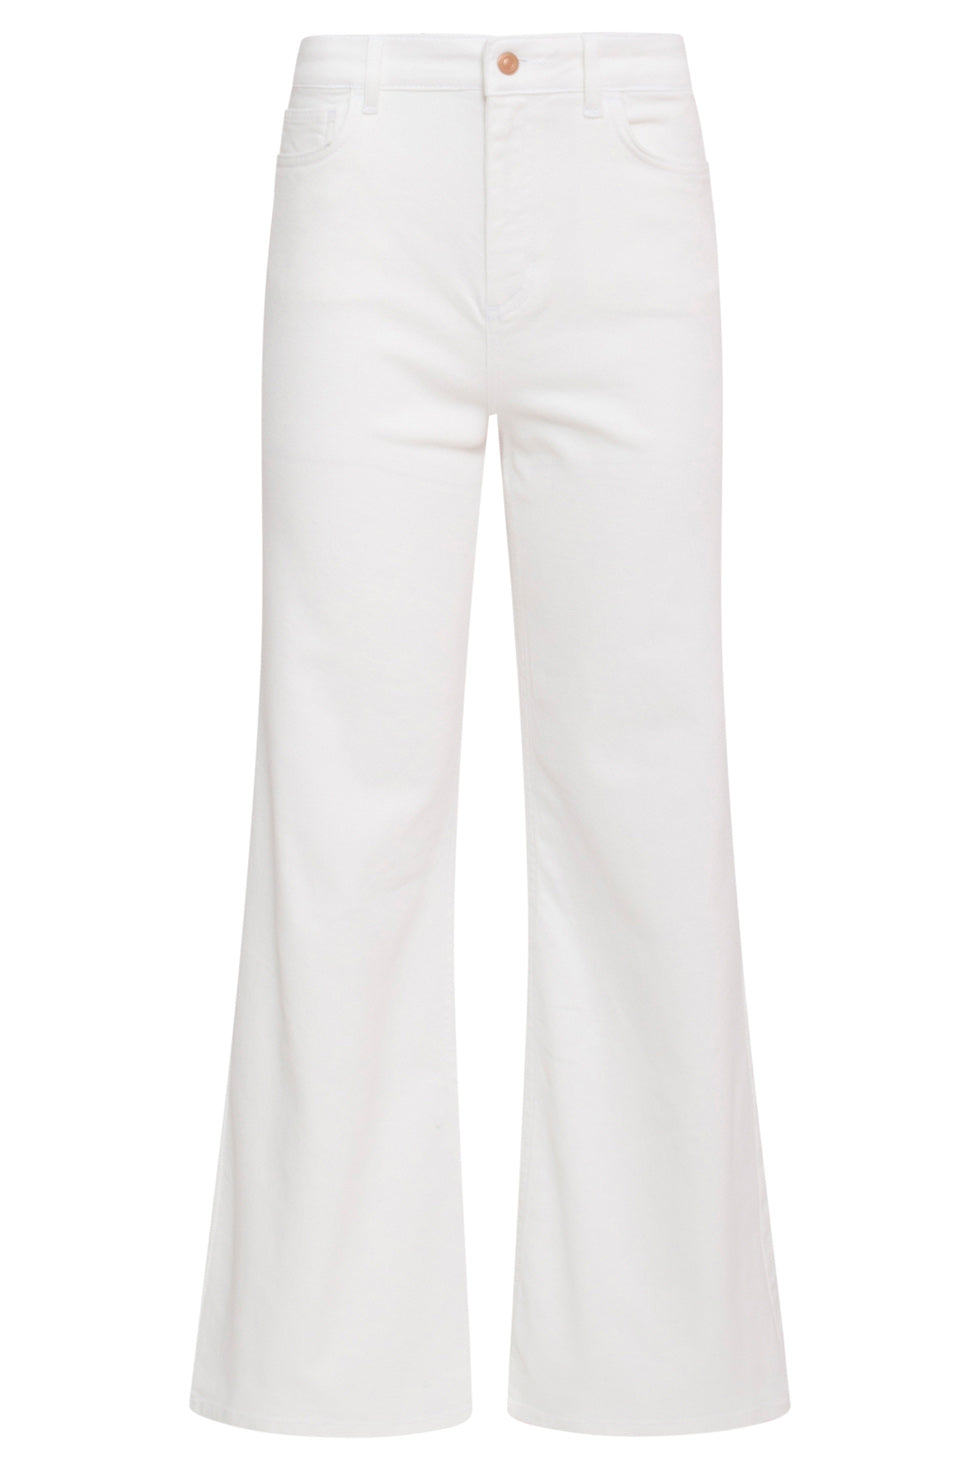 24169 Witte Flared Jeans